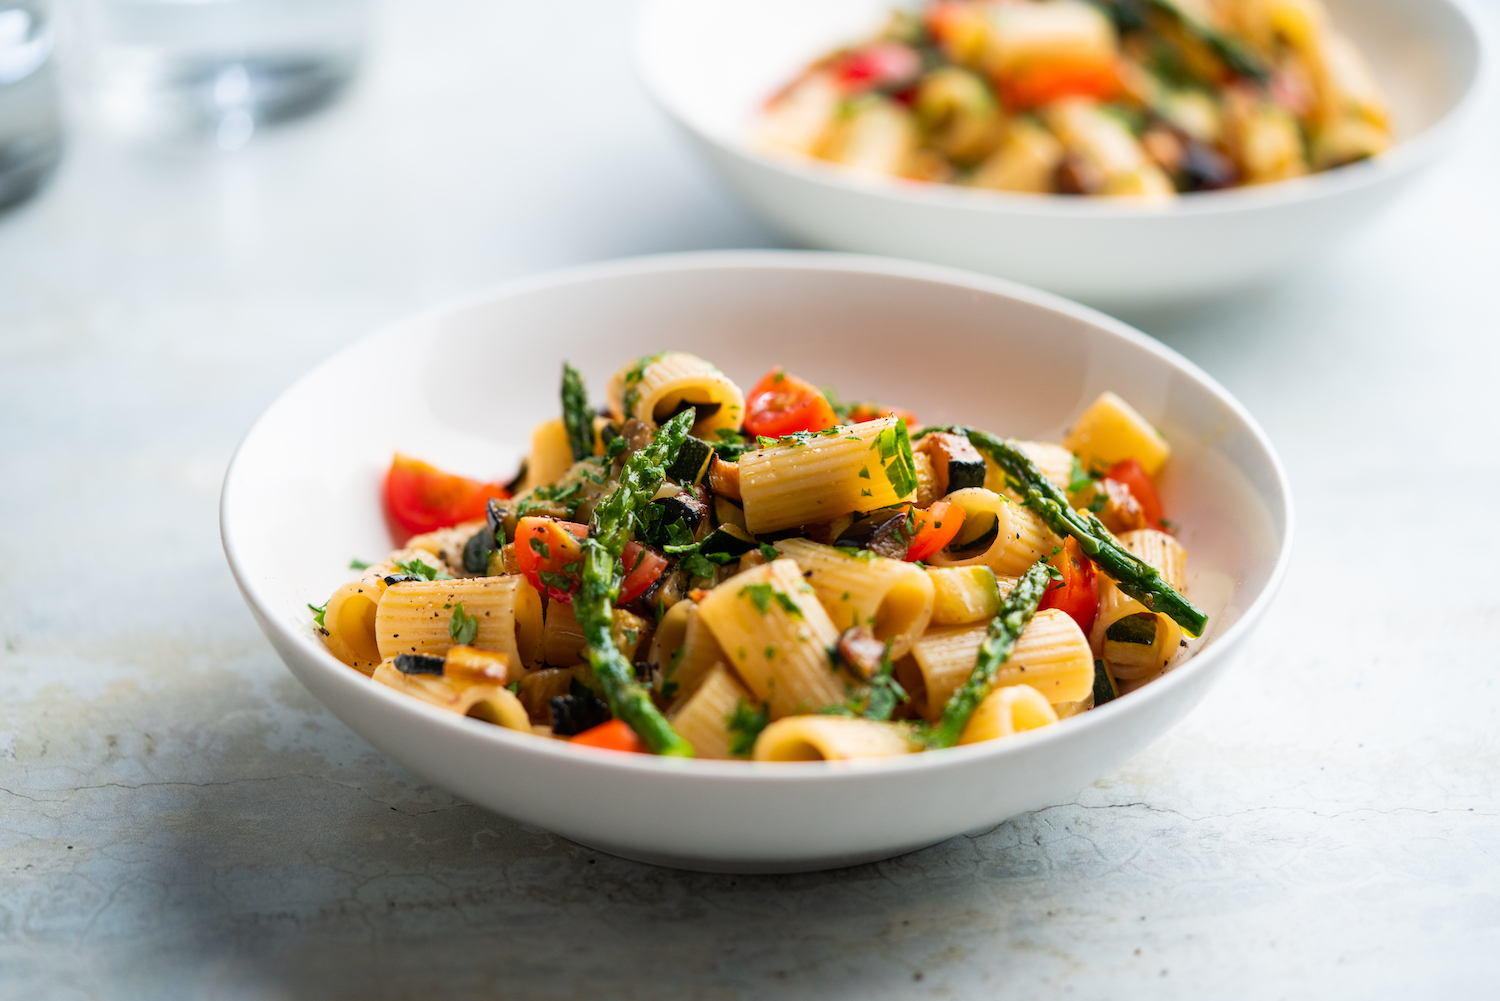 Pasta salad with grilled vegetables, zucchini, eggplant, asparagus and tomatoes